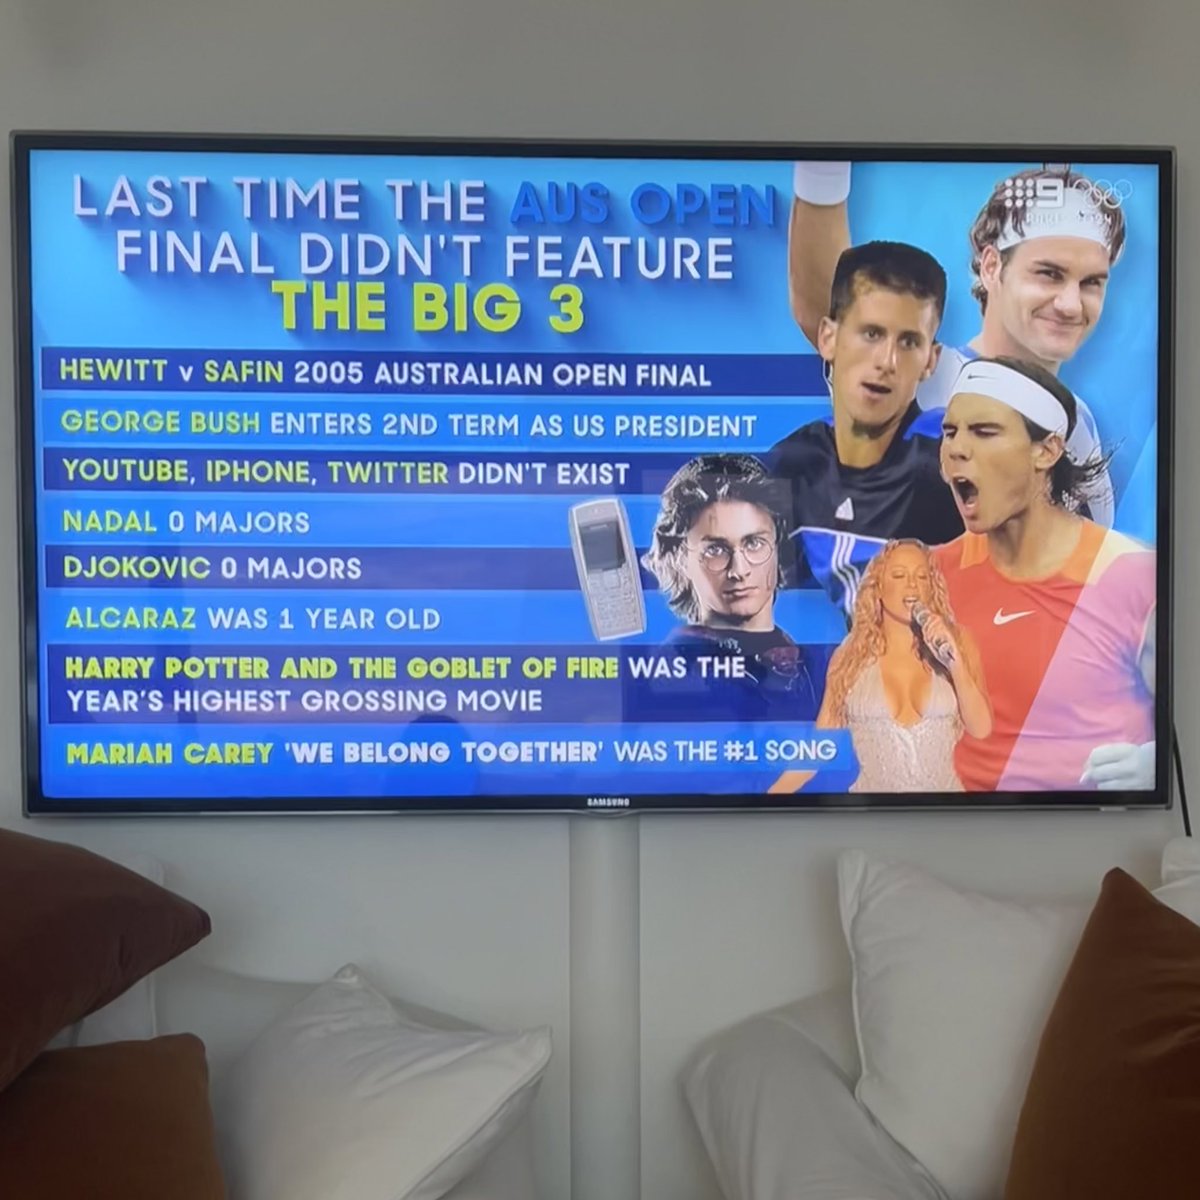 Absolutely losing my mind at this Channel 9 infographic attempting to explain the dominance of Fed, Nadal and Djokovic by referencing trivia from 2005. The Nokia 🤣 #AusOpen